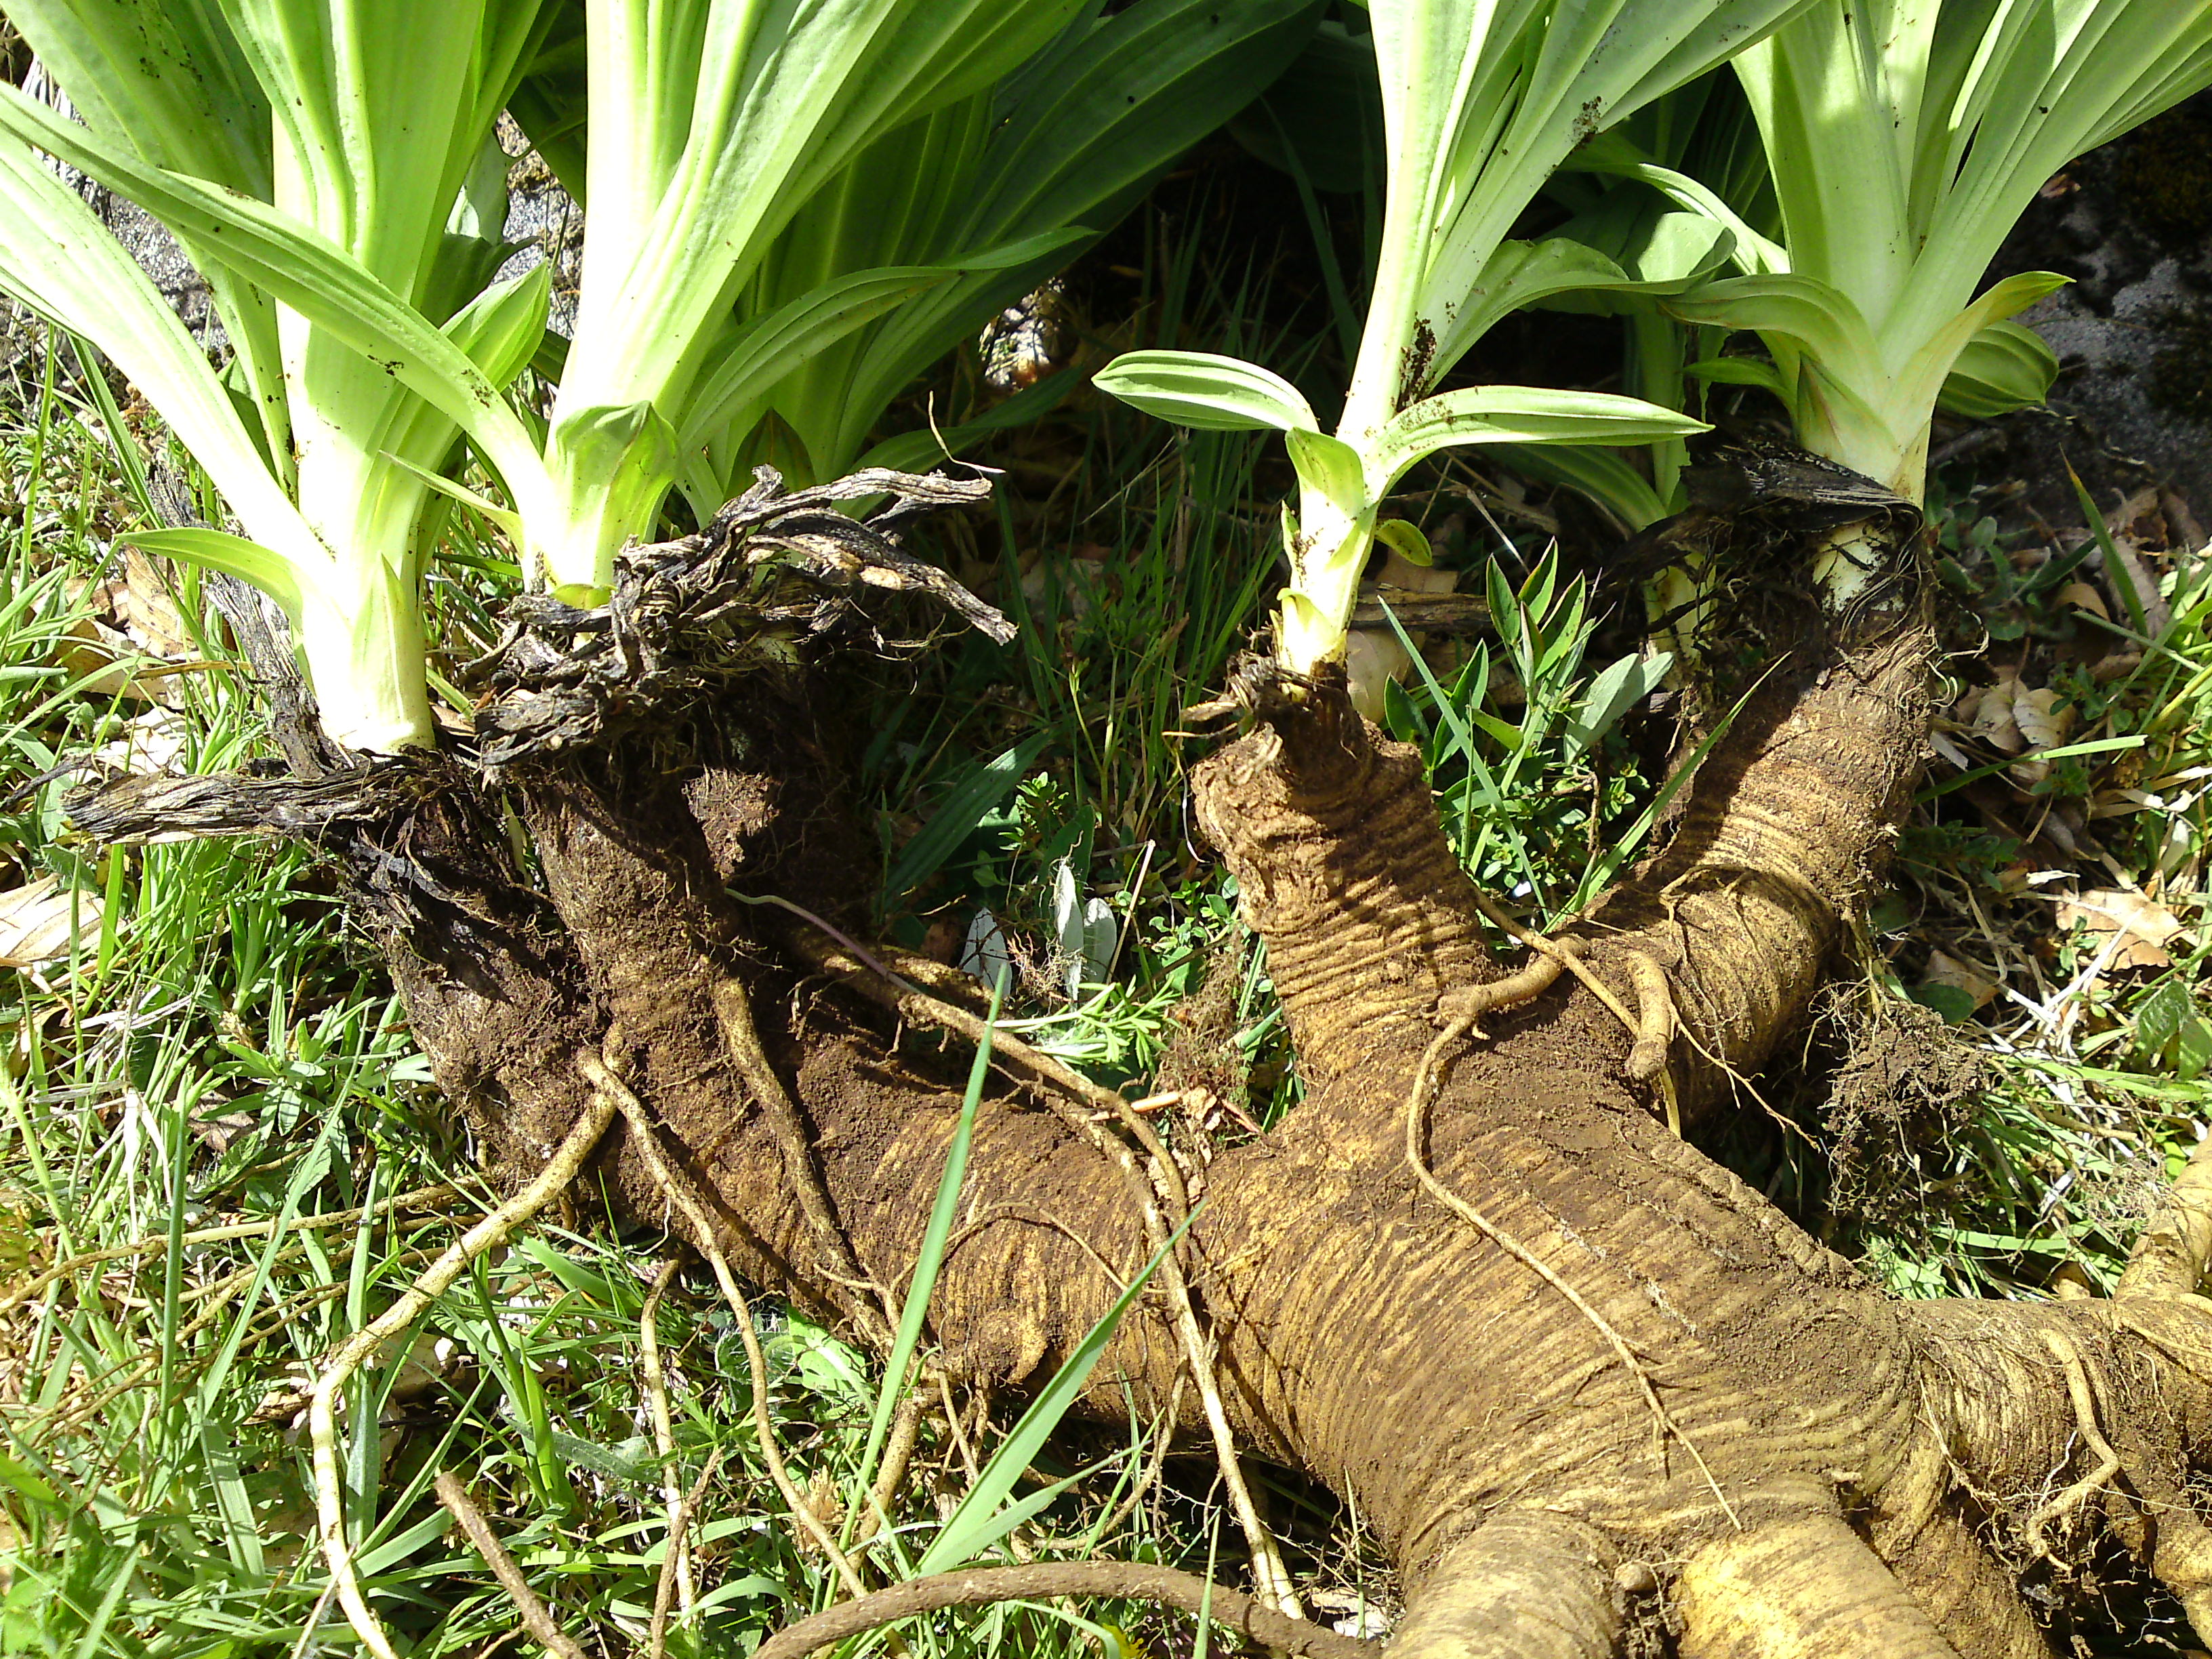 Underground part of a Gentian plant: rhizome + root system.